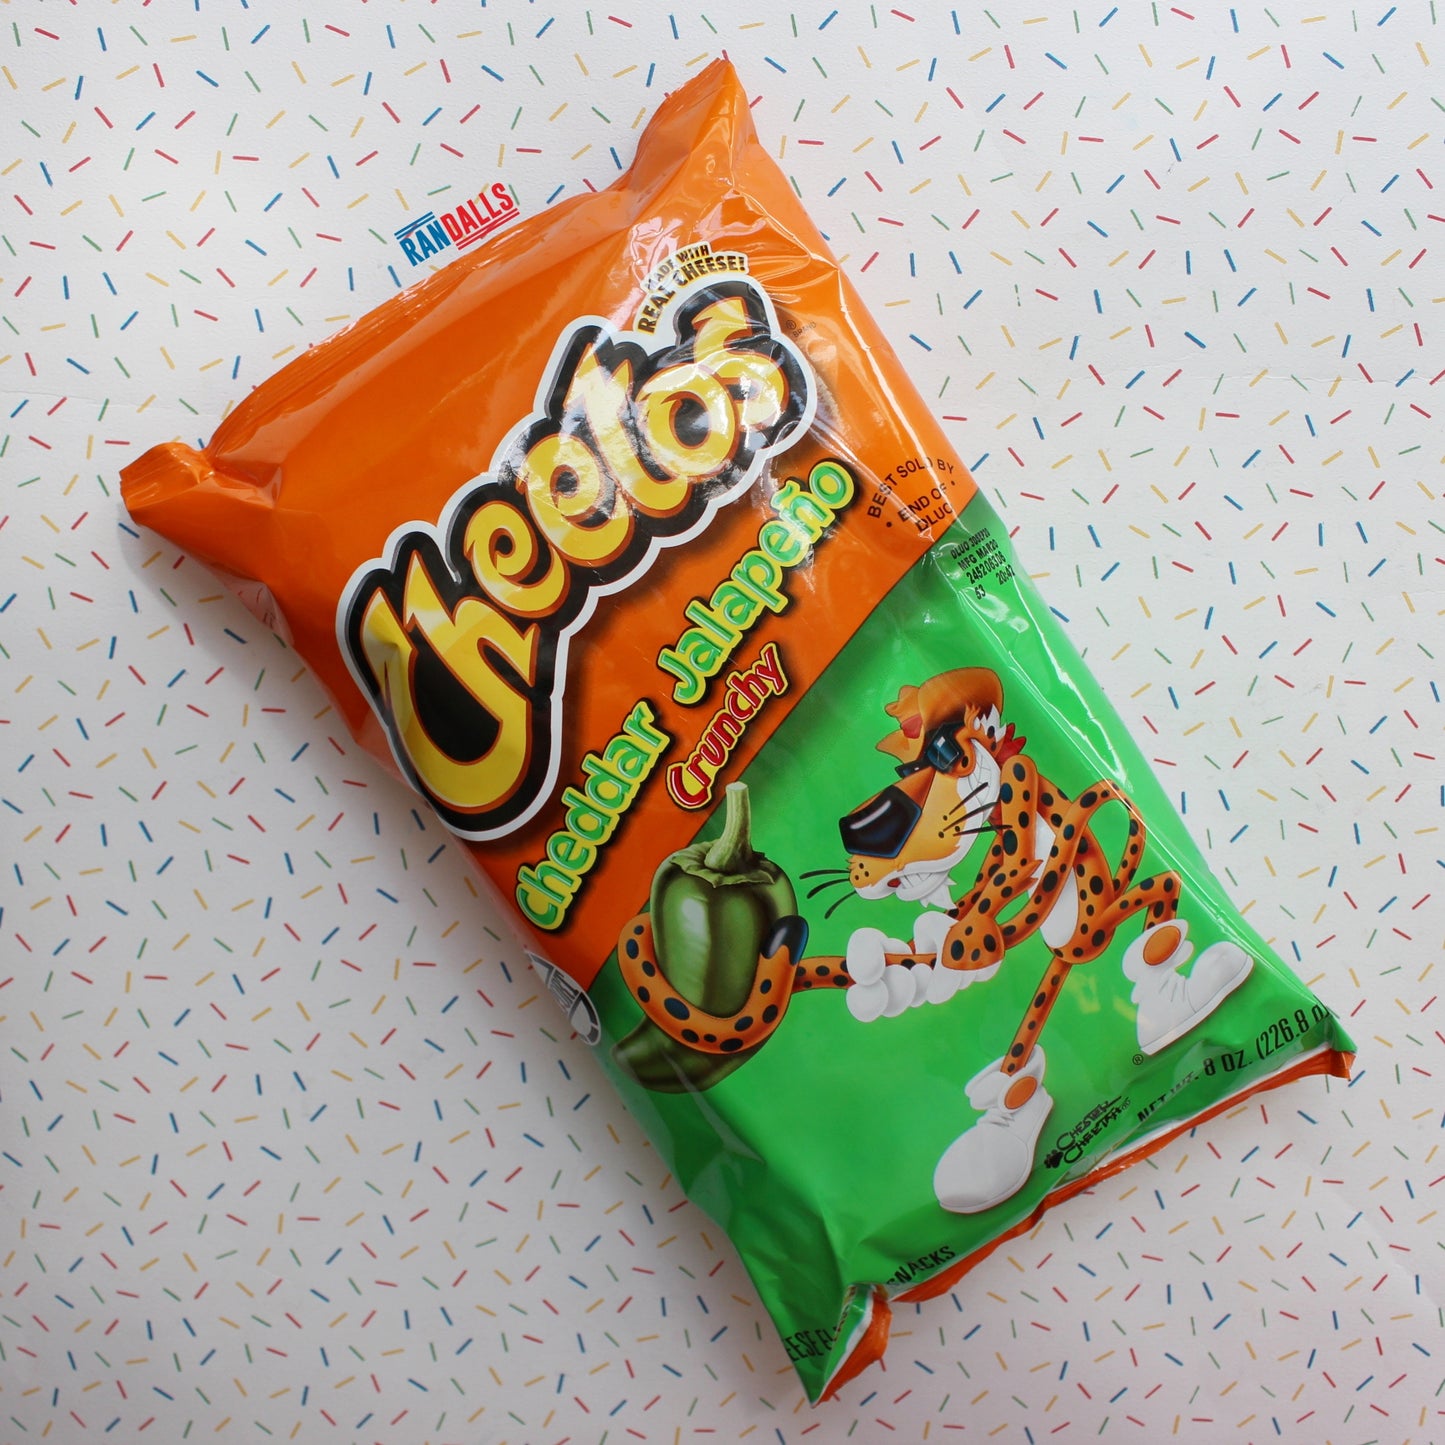 cheetos jalapeno cheddar large, cheese puffs crisps, chips, crunchy, spicy, randalls